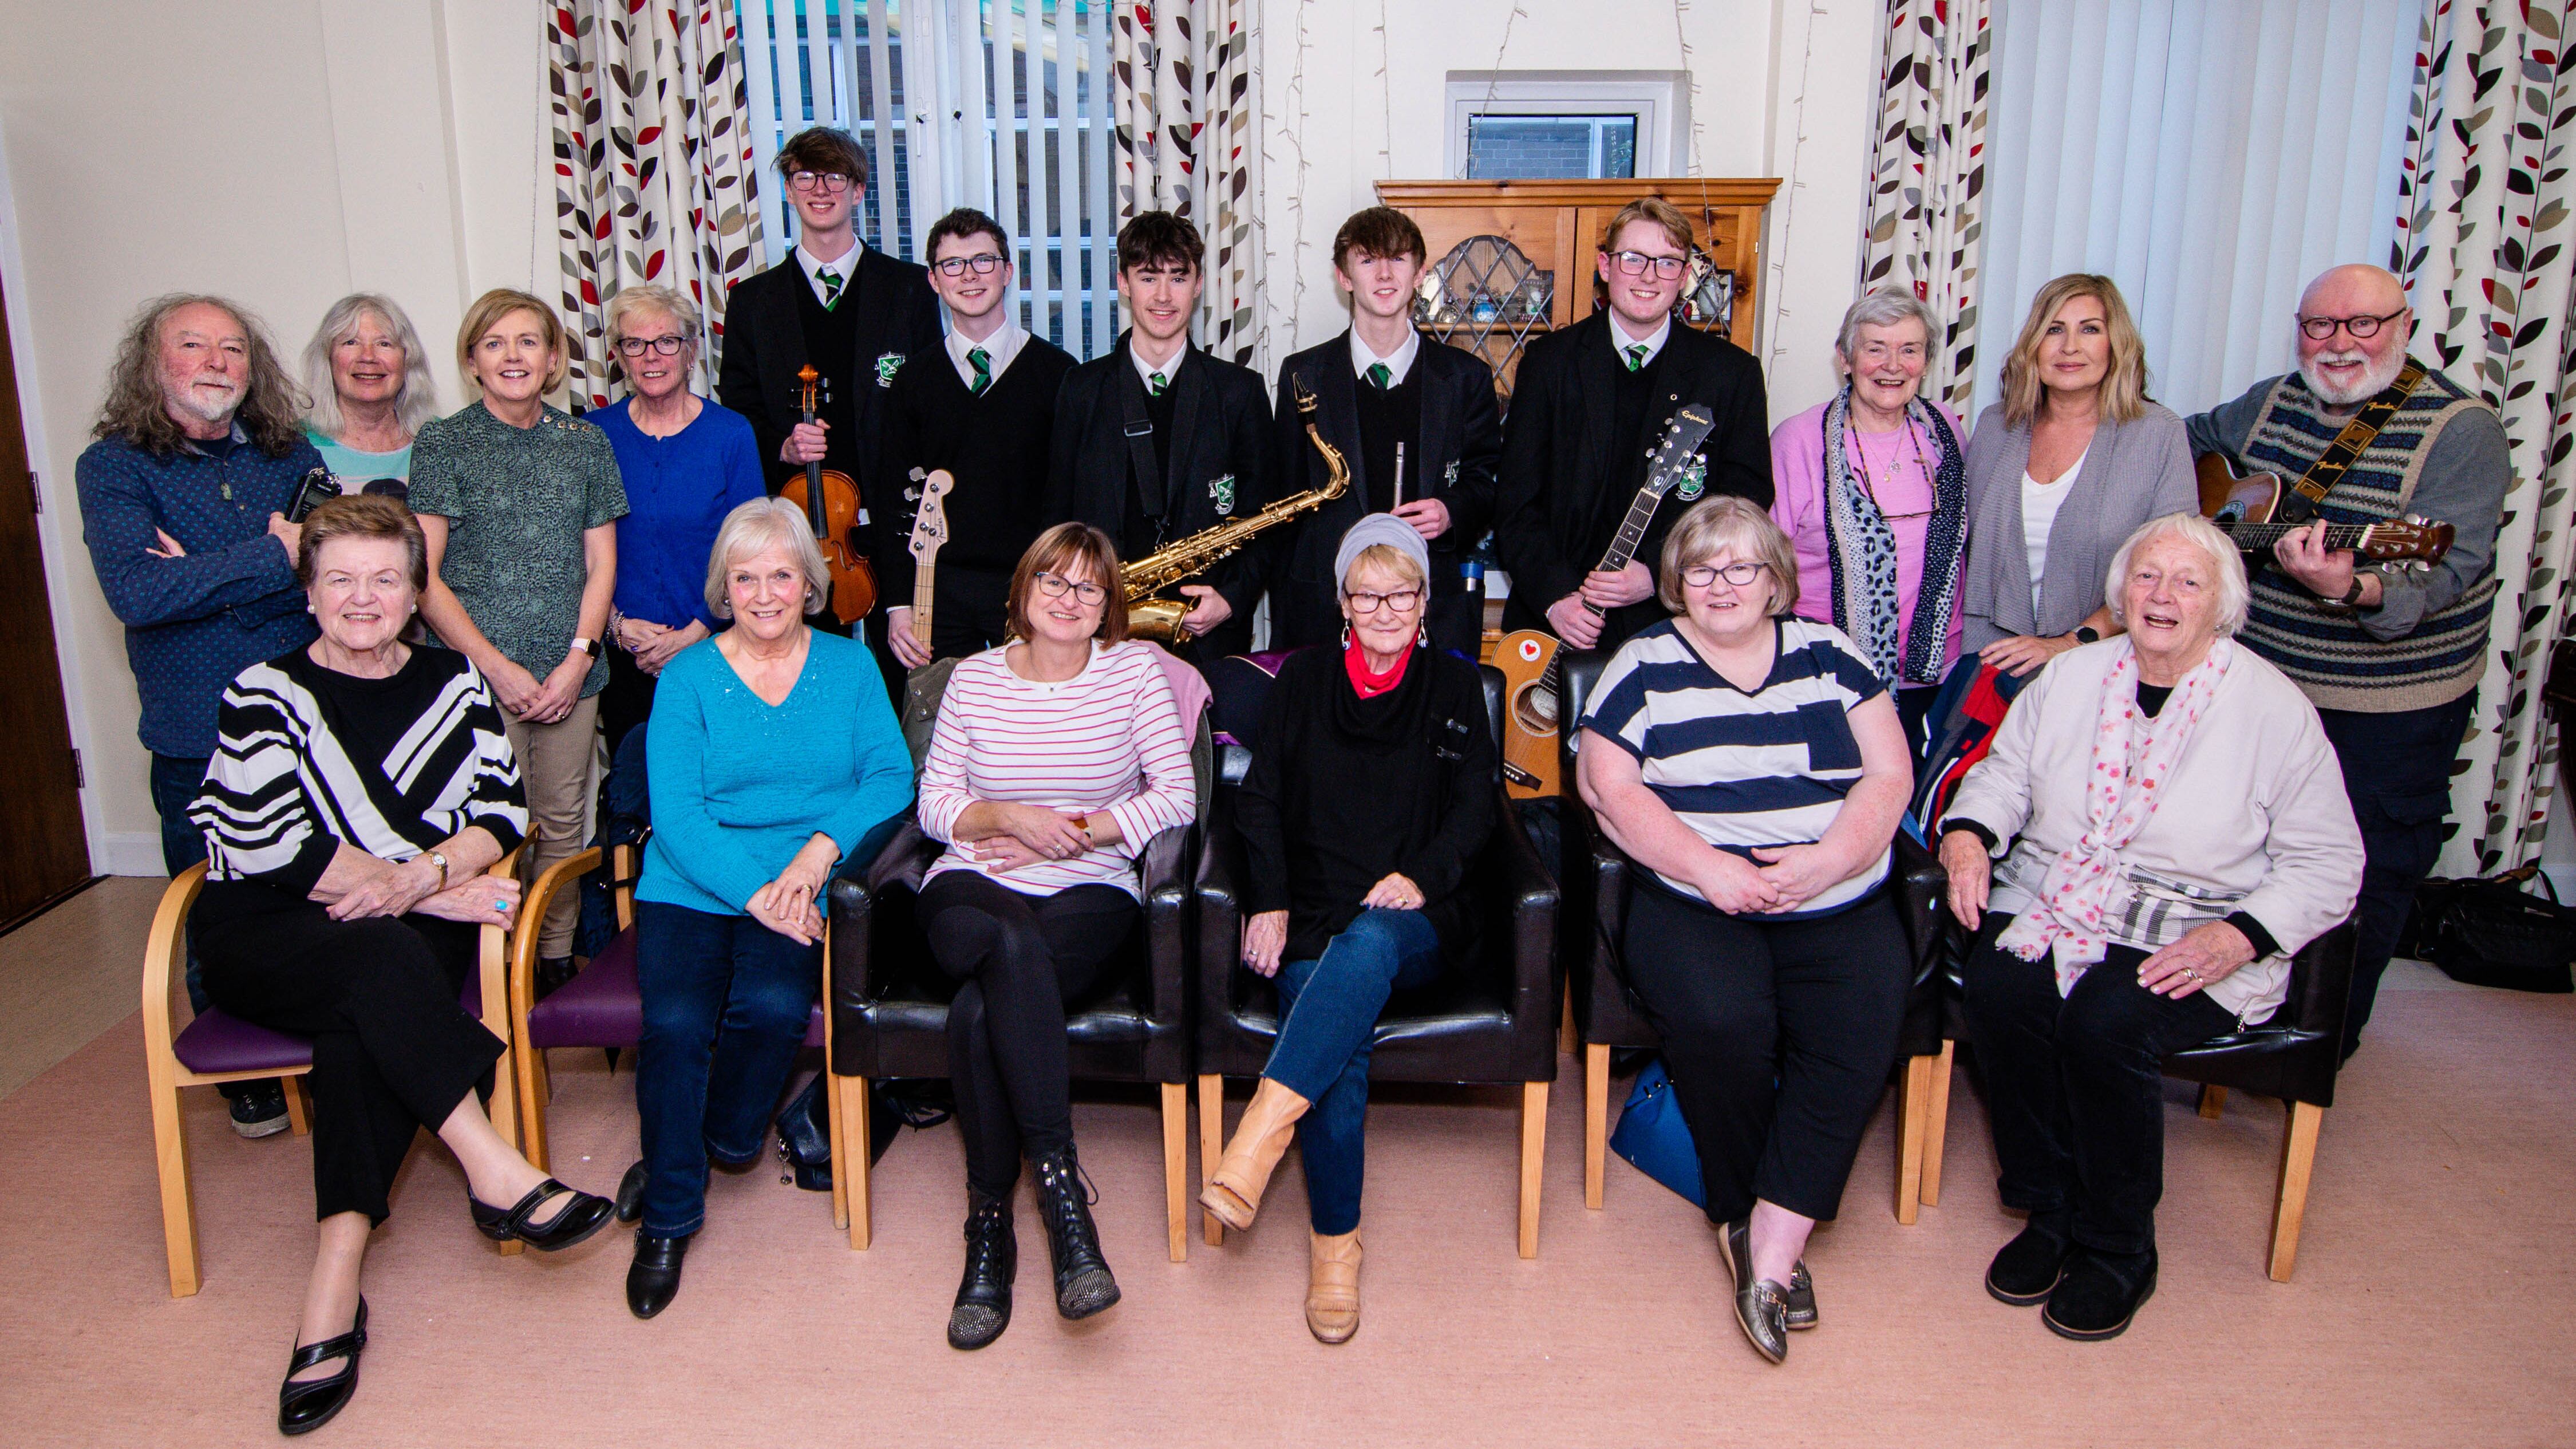 There was also an intergenerational element to the project with St Malachy’s students visiting Newington Day Centre